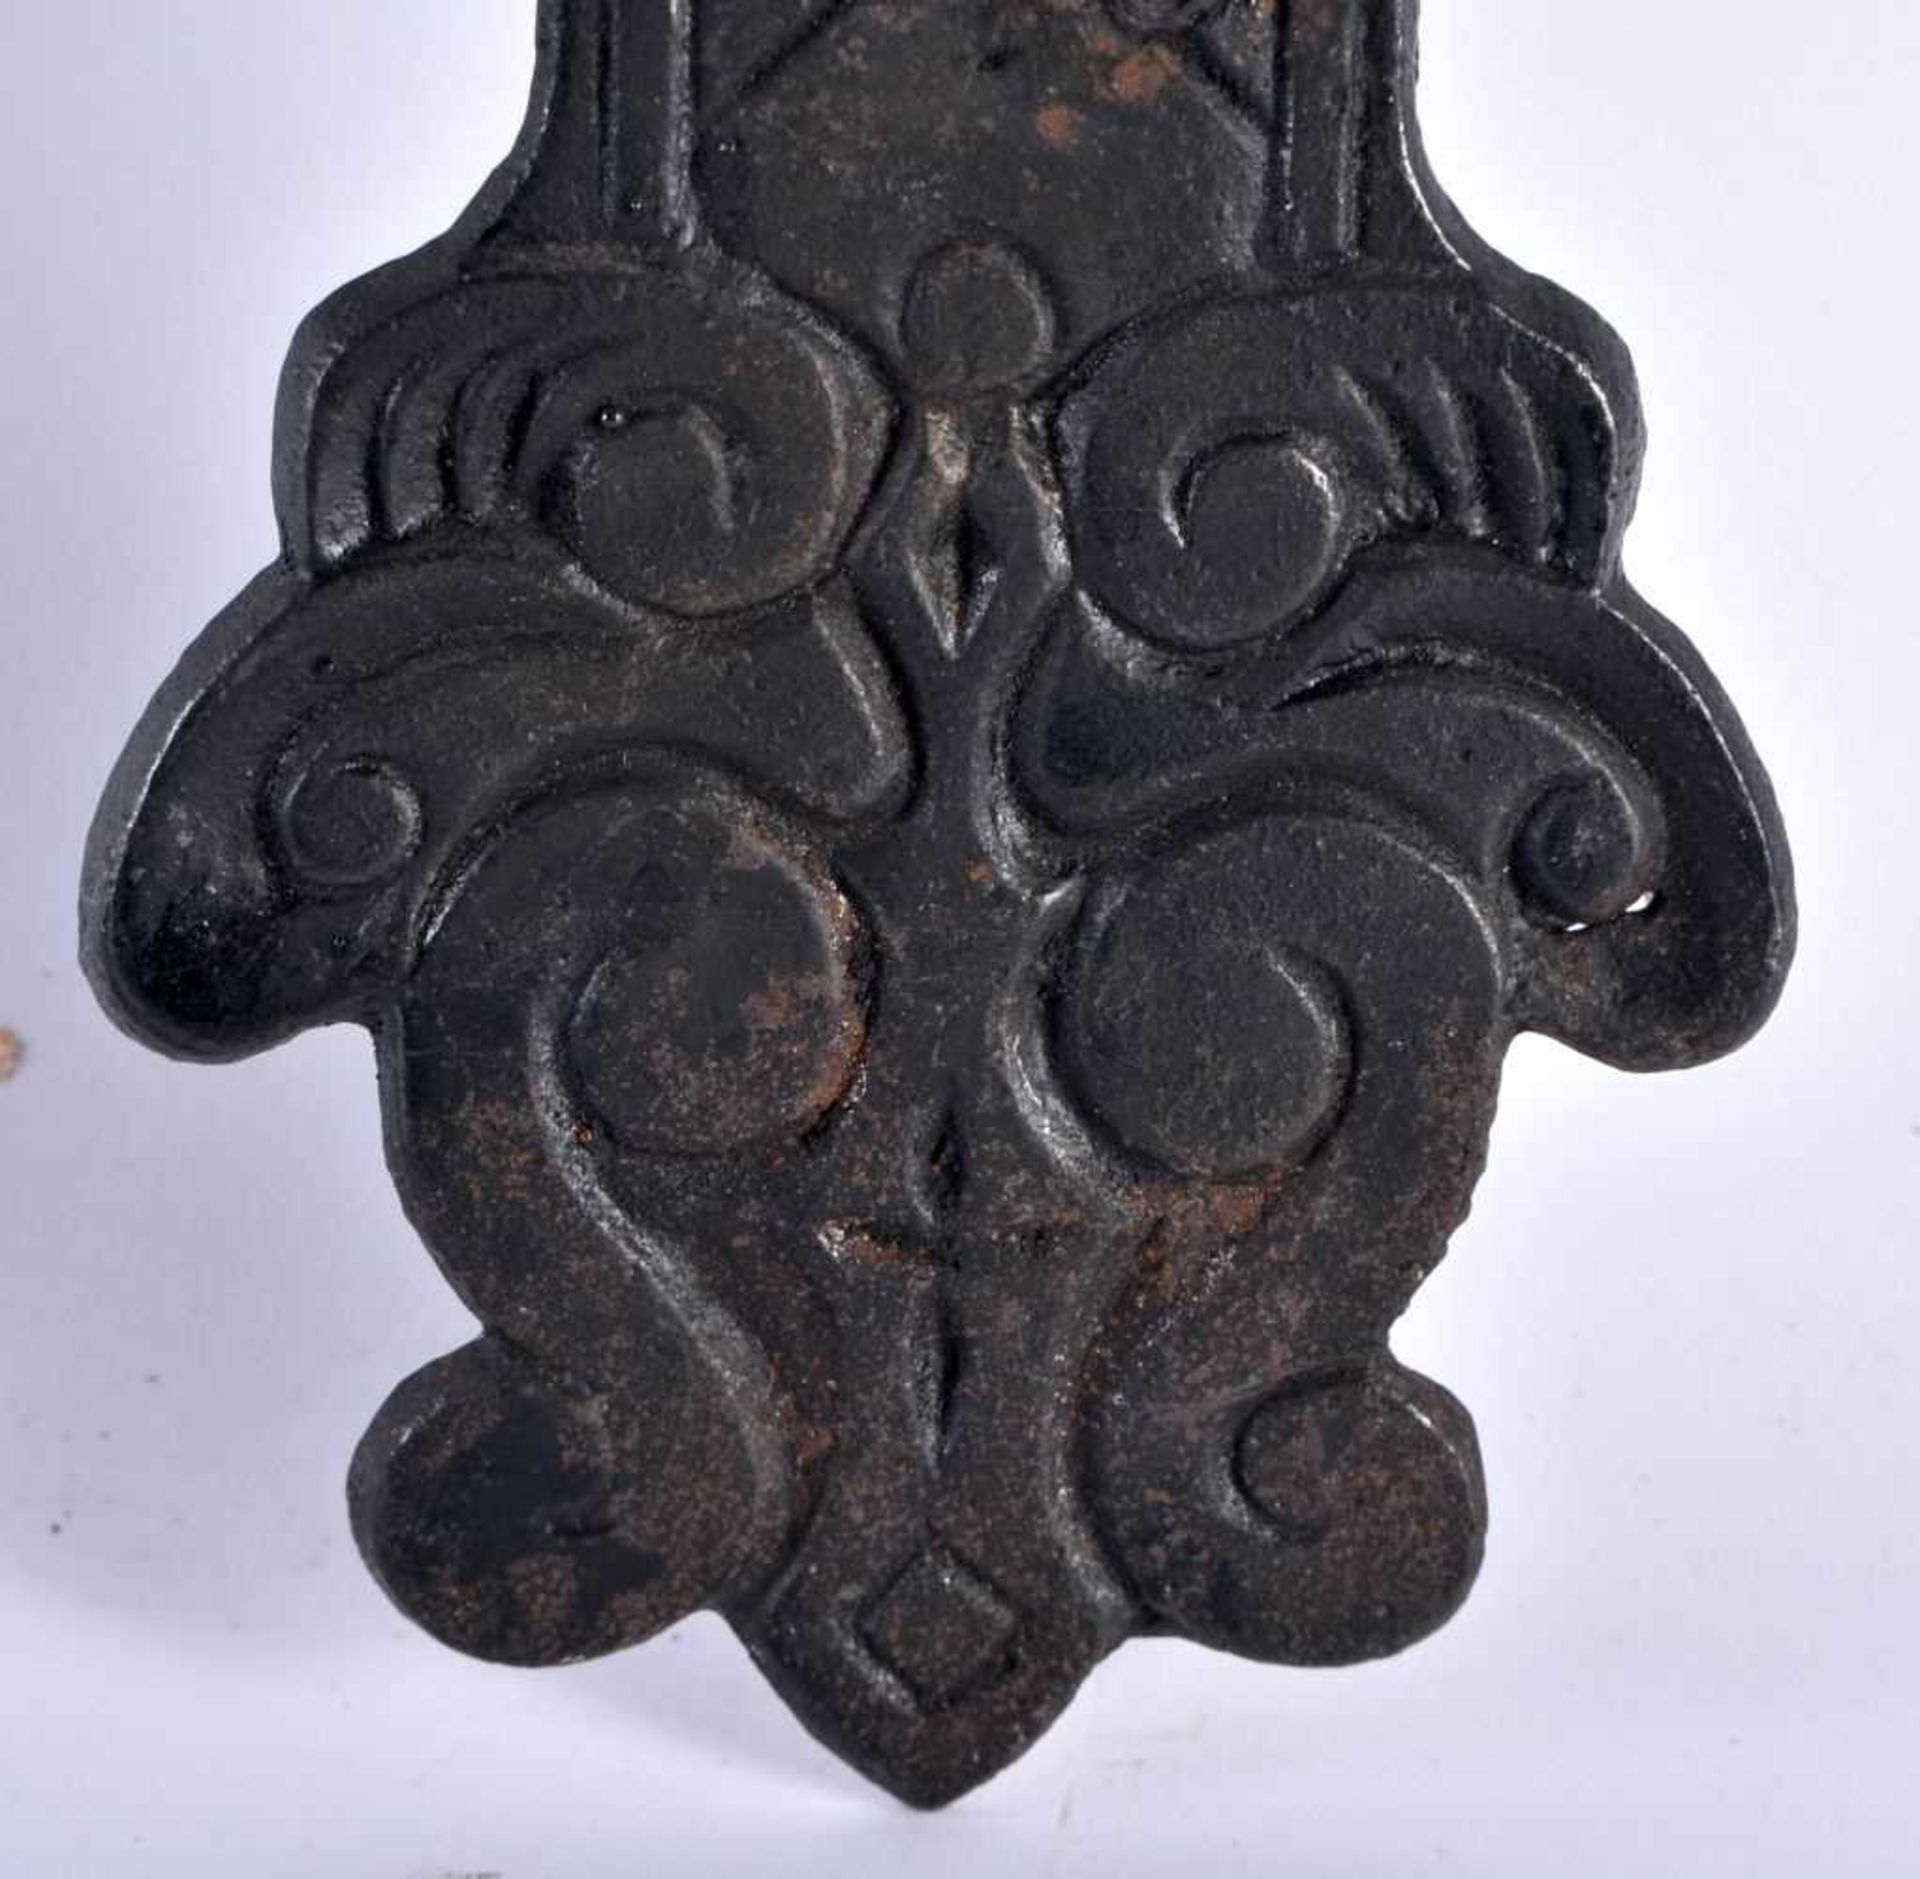 AN ARTS AND CRAFTS CAST SHEET IRON CRUCIFIX formed with floral motifs. 45 cm x 27 cm. - Image 4 of 5